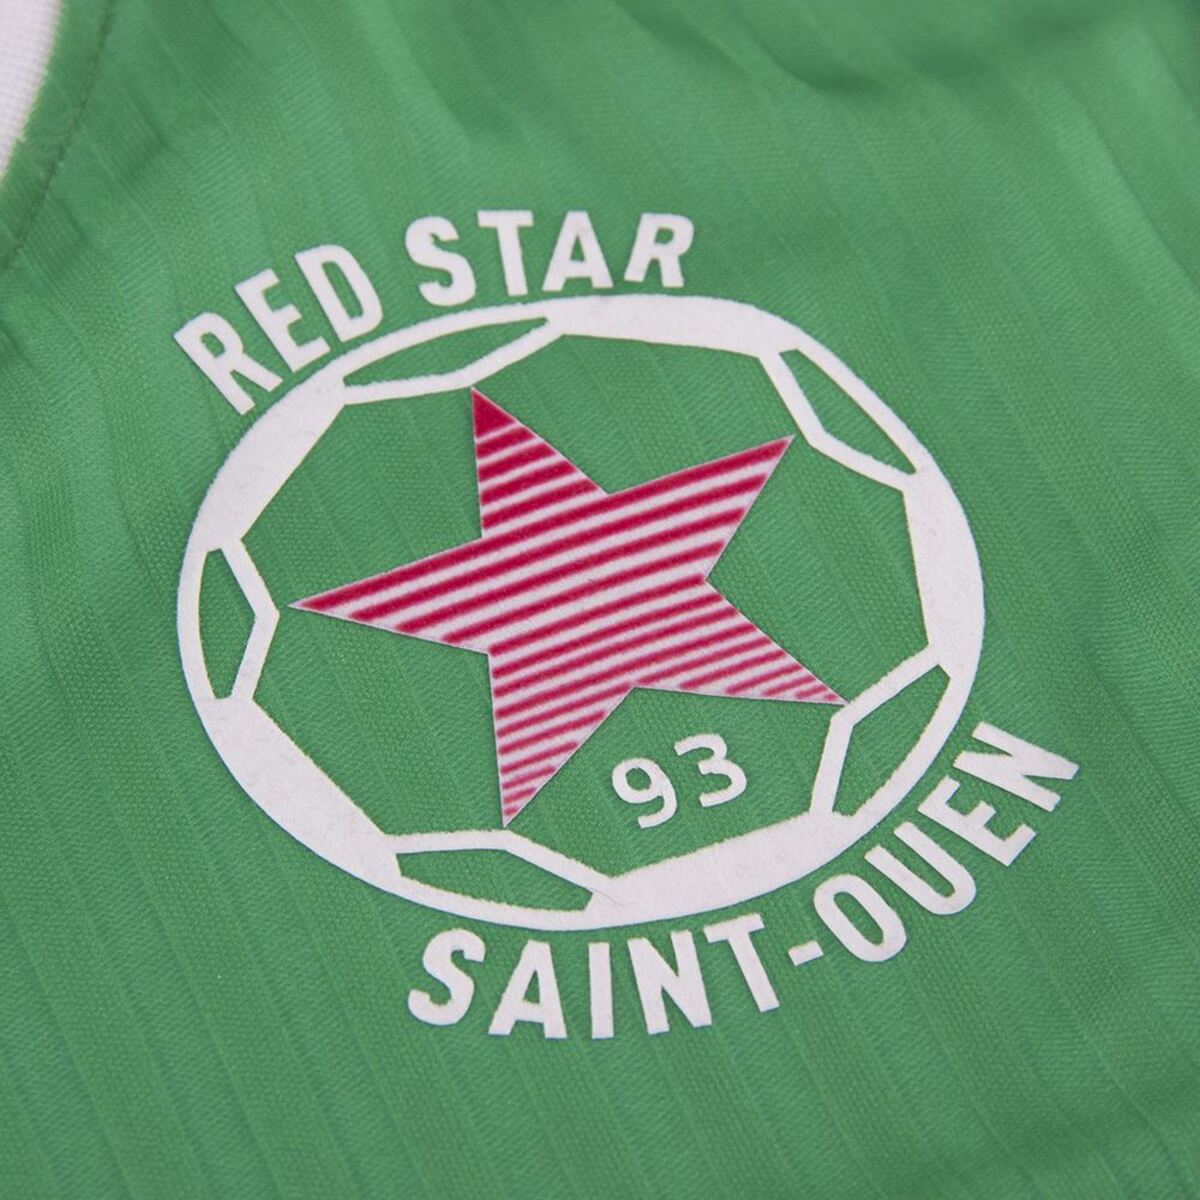 red-star-fc-25-football-club-facts